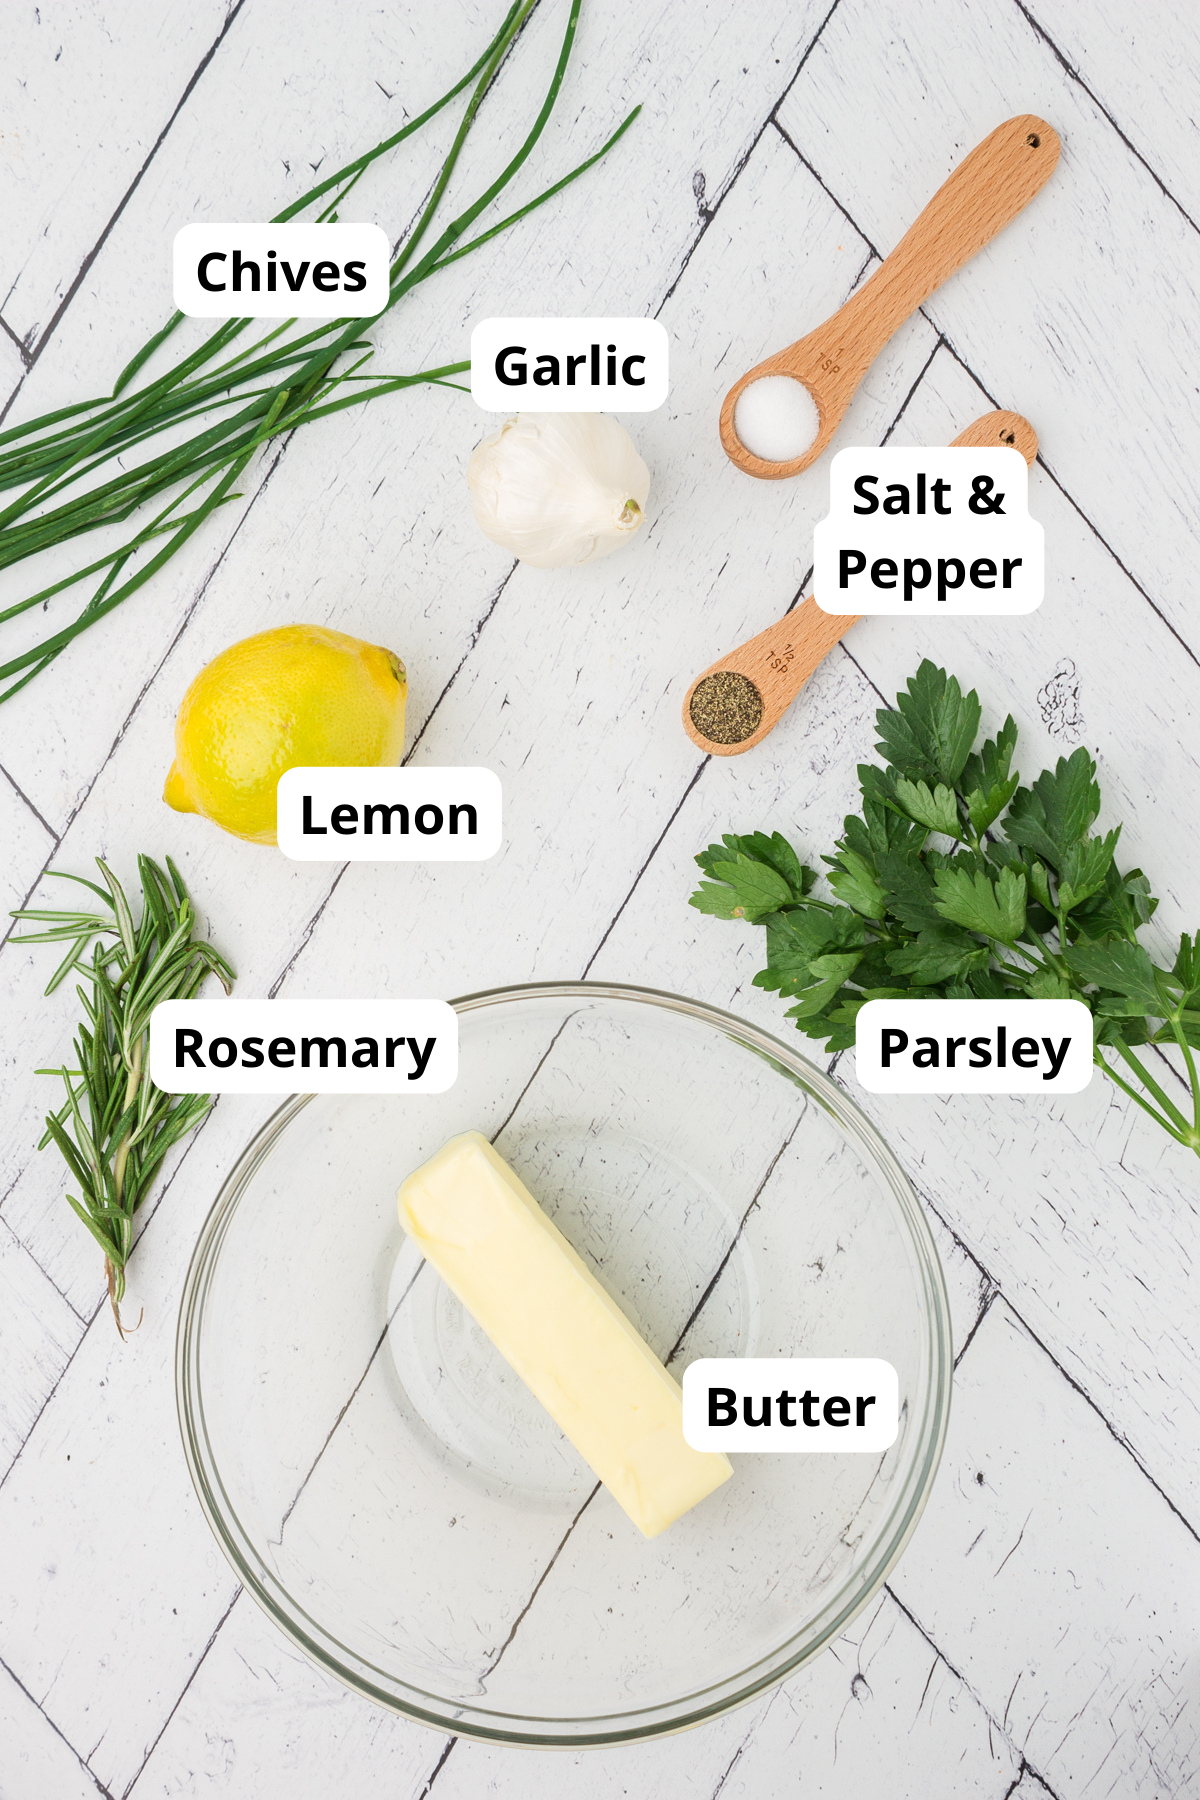 step by step process shots to make garlic herb compound butter